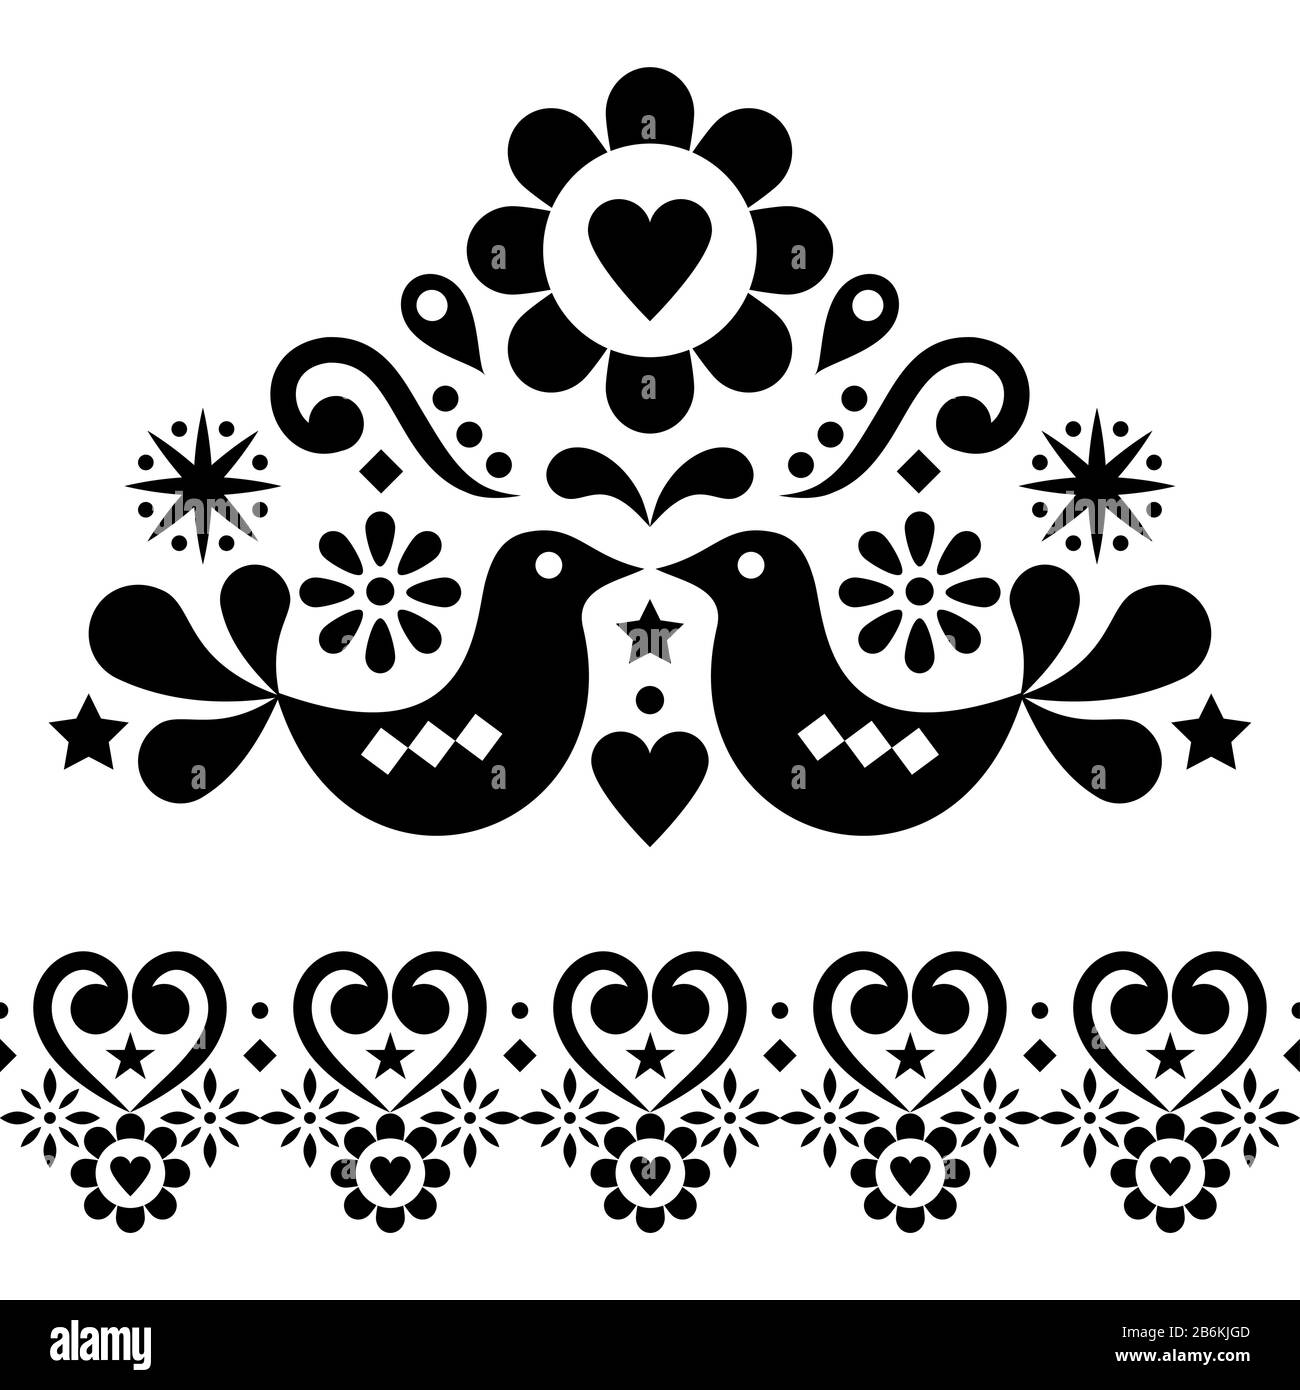 Valentine's Day folk art vector design set for greeting card or wedding invitation - Scandinavian style patterns with birds, hearts and flowers Stock Vector